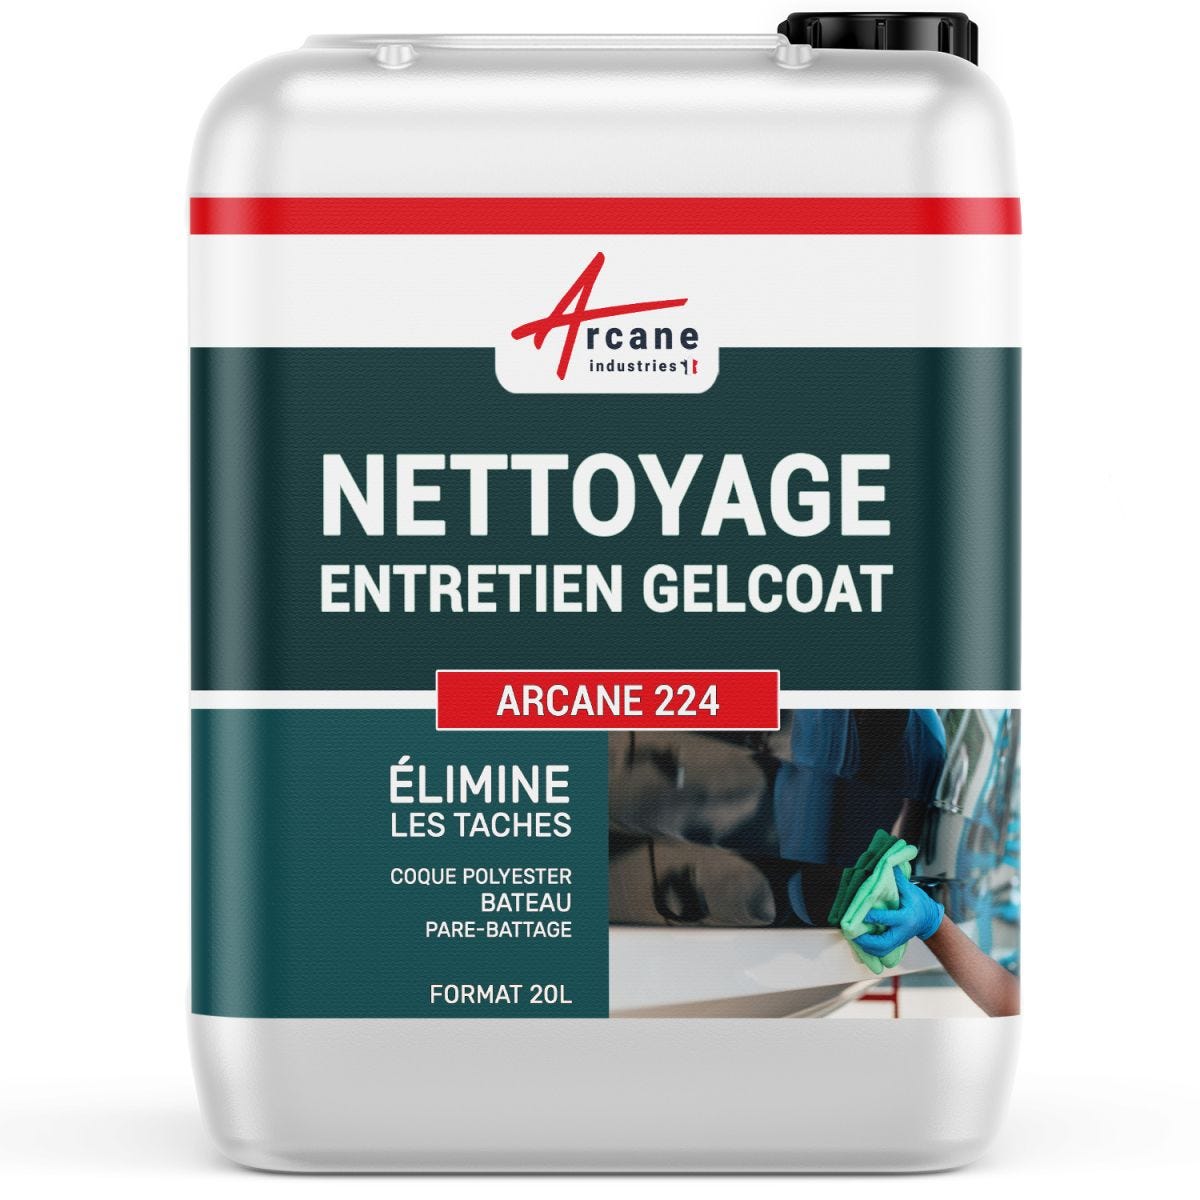 NETTOYAGE ENTRETIEN GELCOAT- Nettoyant coques polyester - 20 L - - ARCANE INDUSTRIES 0